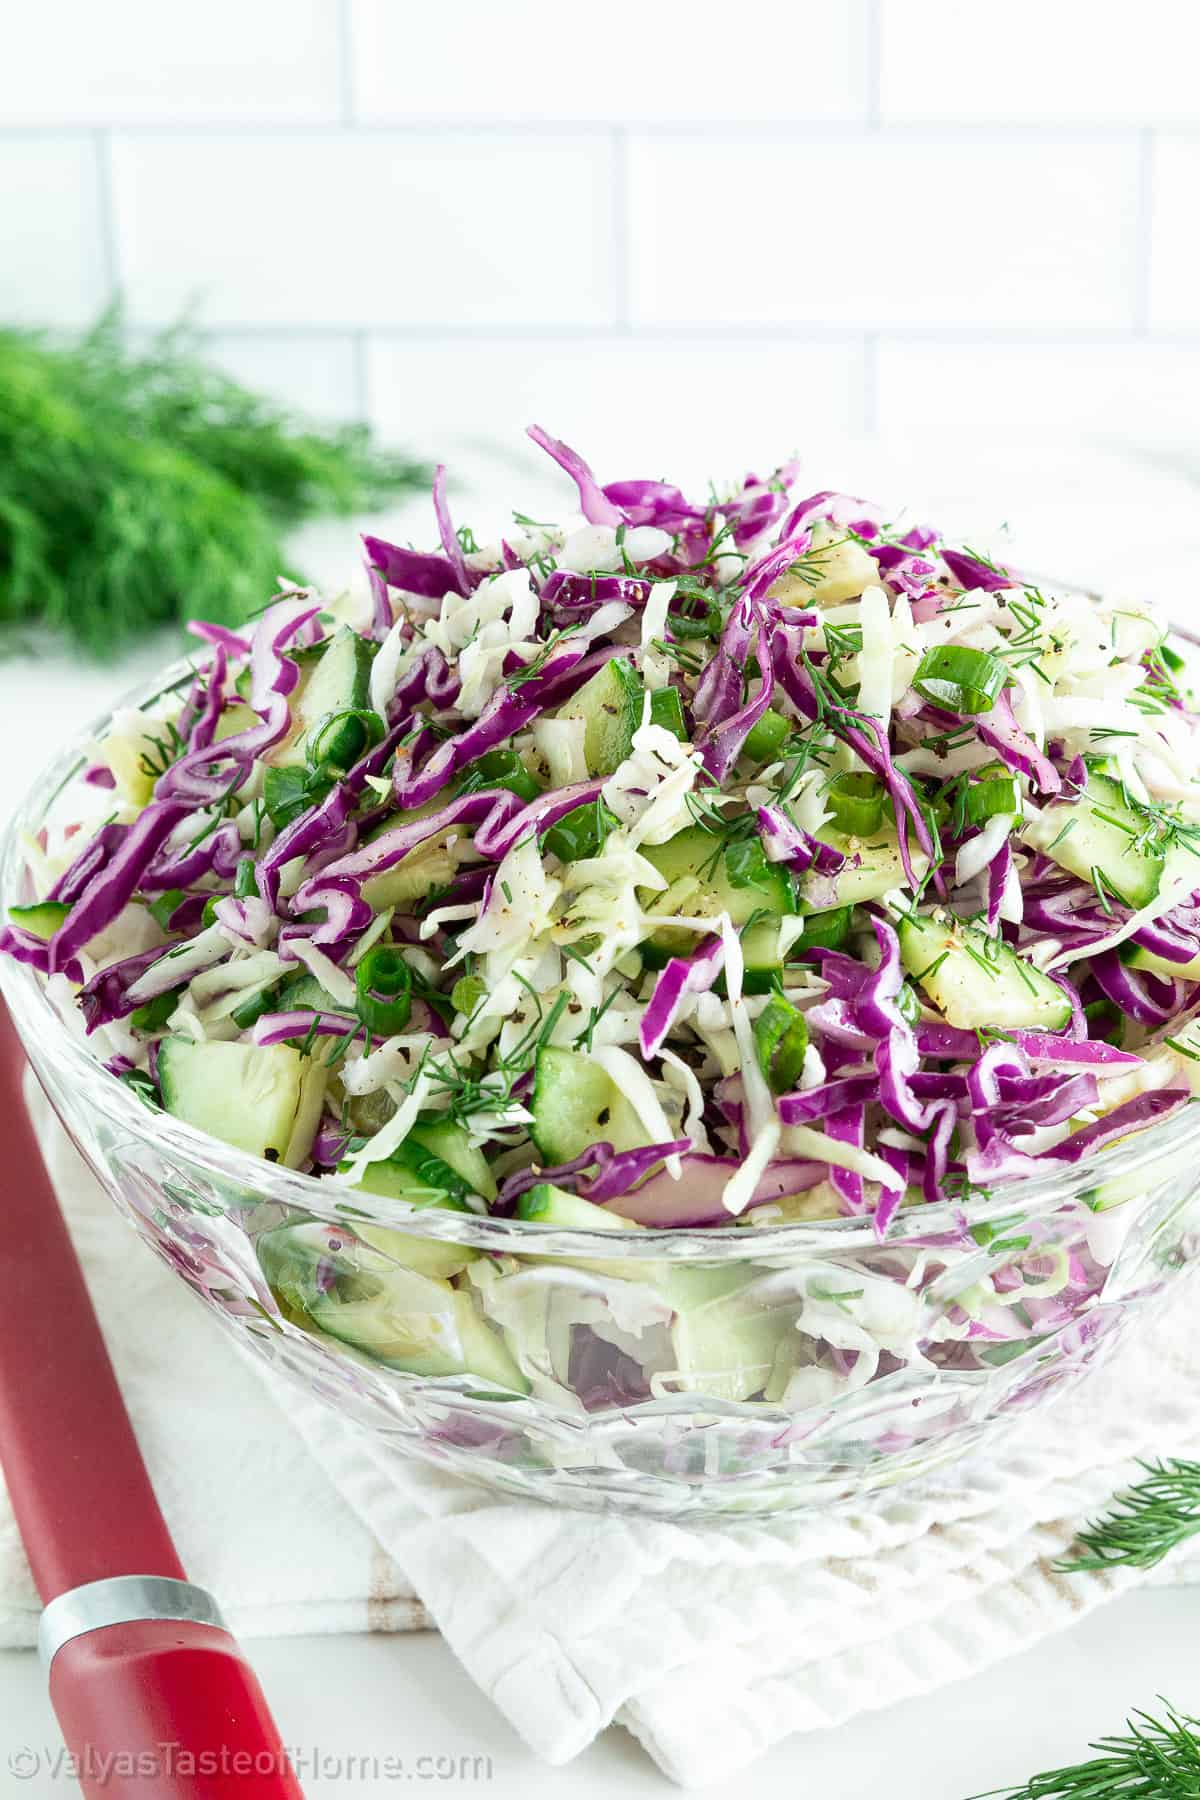 https://www.valyastasteofhome.com/wp-content/uploads/2022/01/The-Tastiest-Red-Cabbage-Salad-Recipe-Easy-to-Make-1.jpg